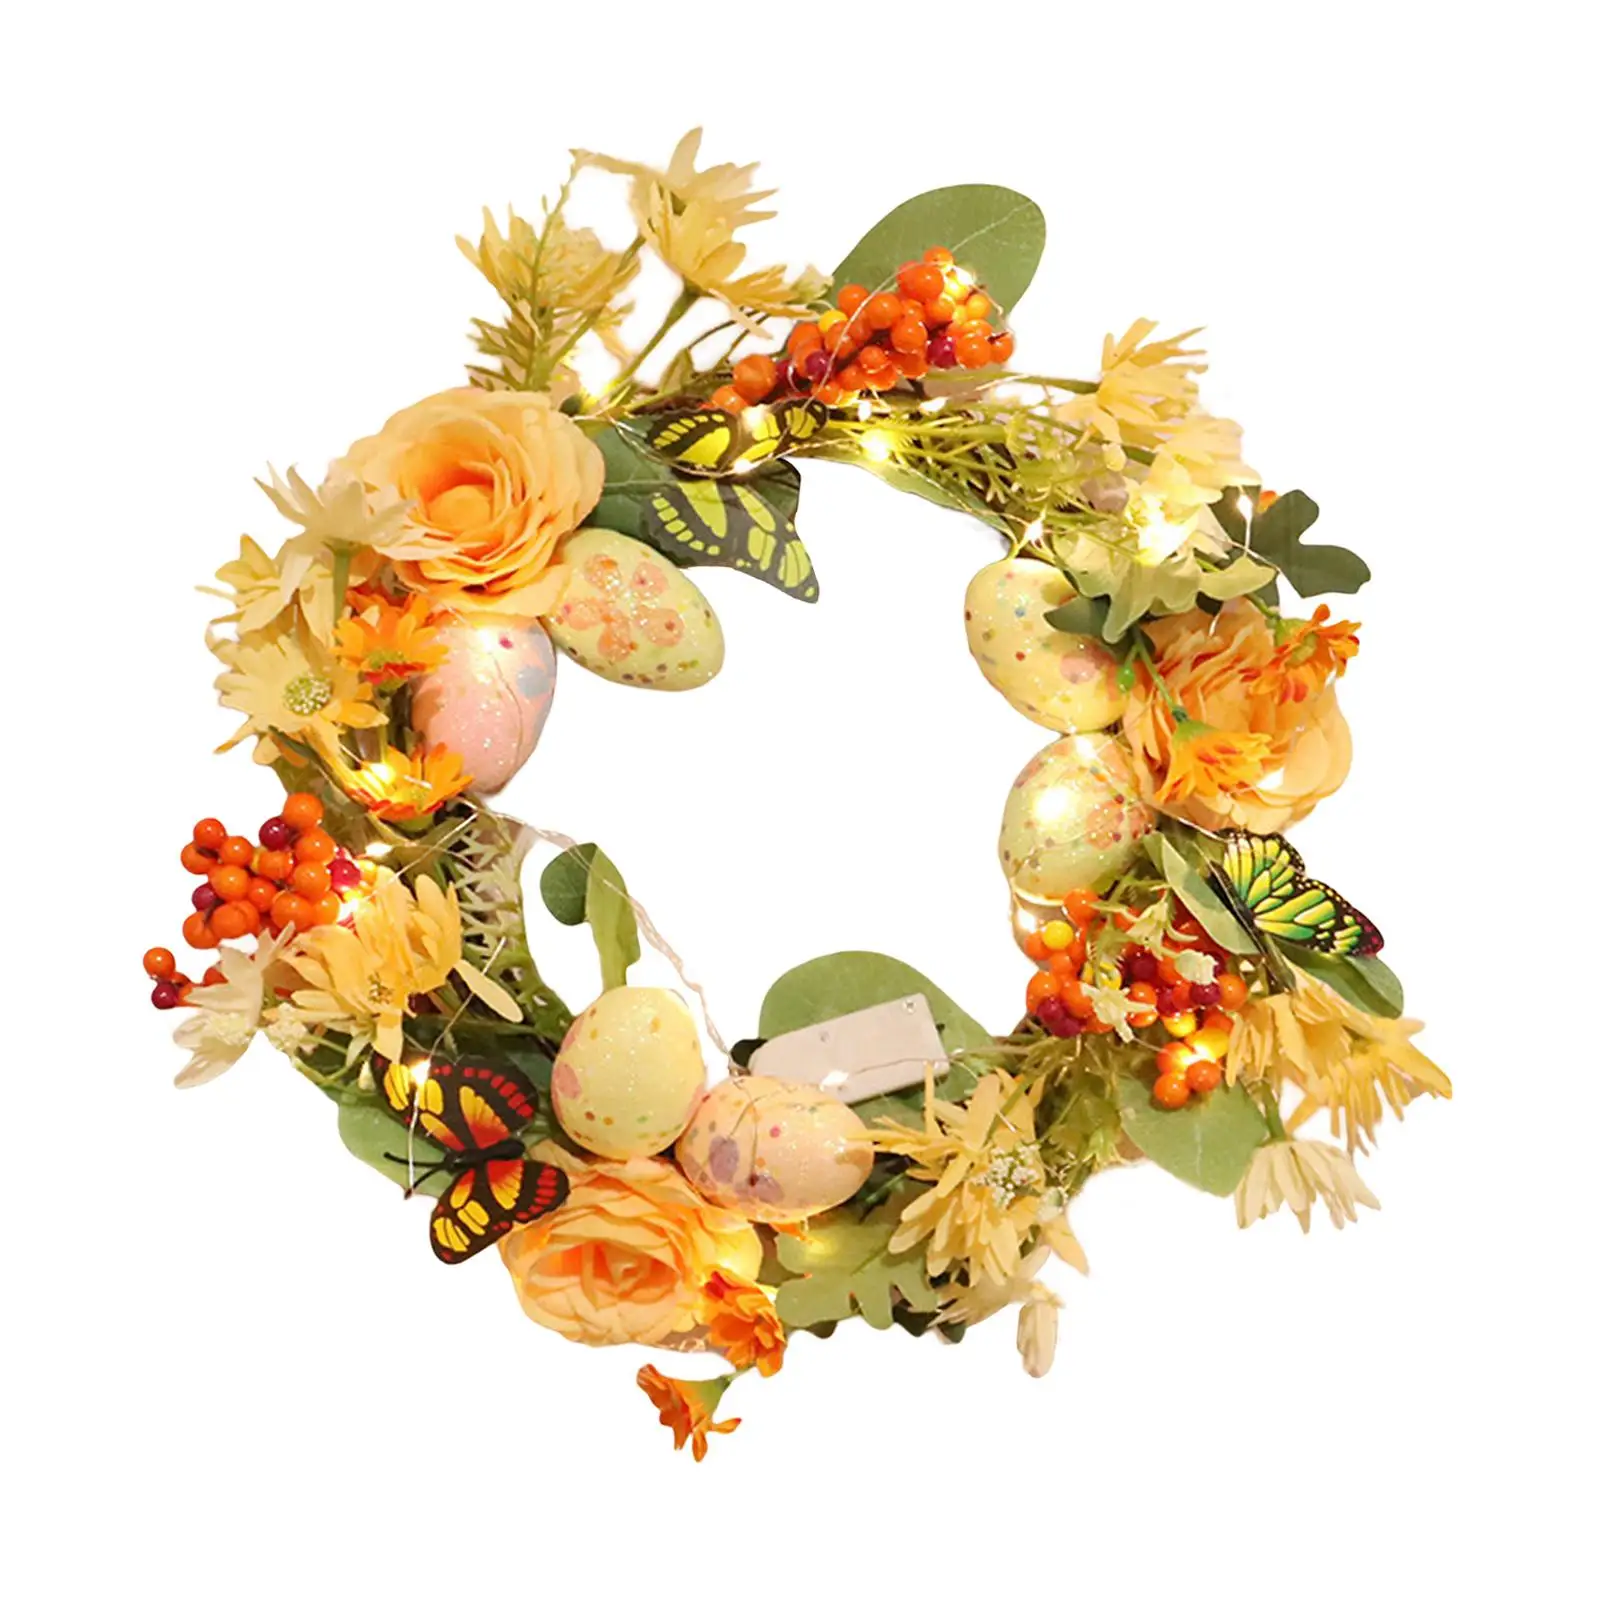 Lighted Easter Wreath Front Door Wreath Decor 12inch with LED Lights Greenery Leaves Flowers Wreaths for Backdrop Outside Spring